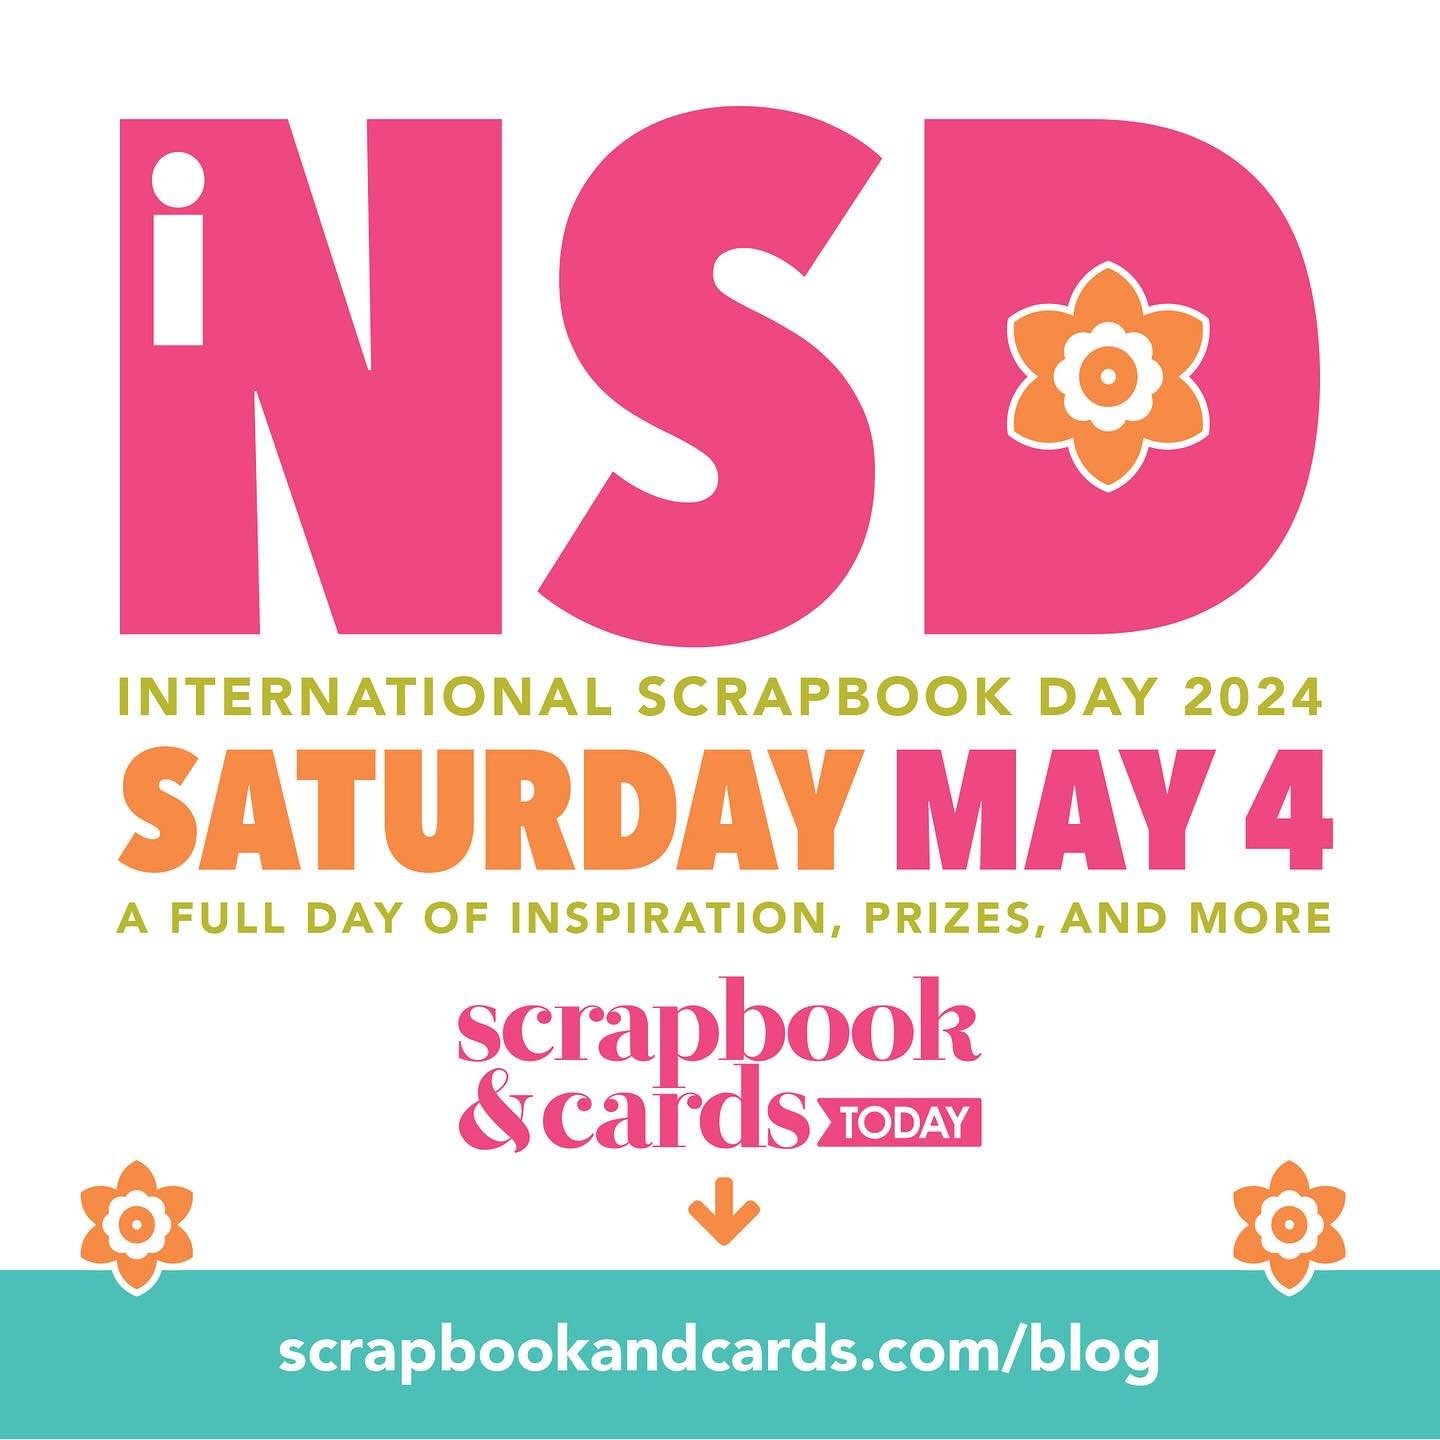 ⭐️ Join me LIVE tomorrow on YouTube for INSD at SCT! ⭐️
.
The party kicks off with a welcome from @catherinesct and I at 9 am EDT, then you&rsquo;ll find a new class on YouTube every hour until 4 pm! I&rsquo;ll be creating LIVE at noon, and I hope yo